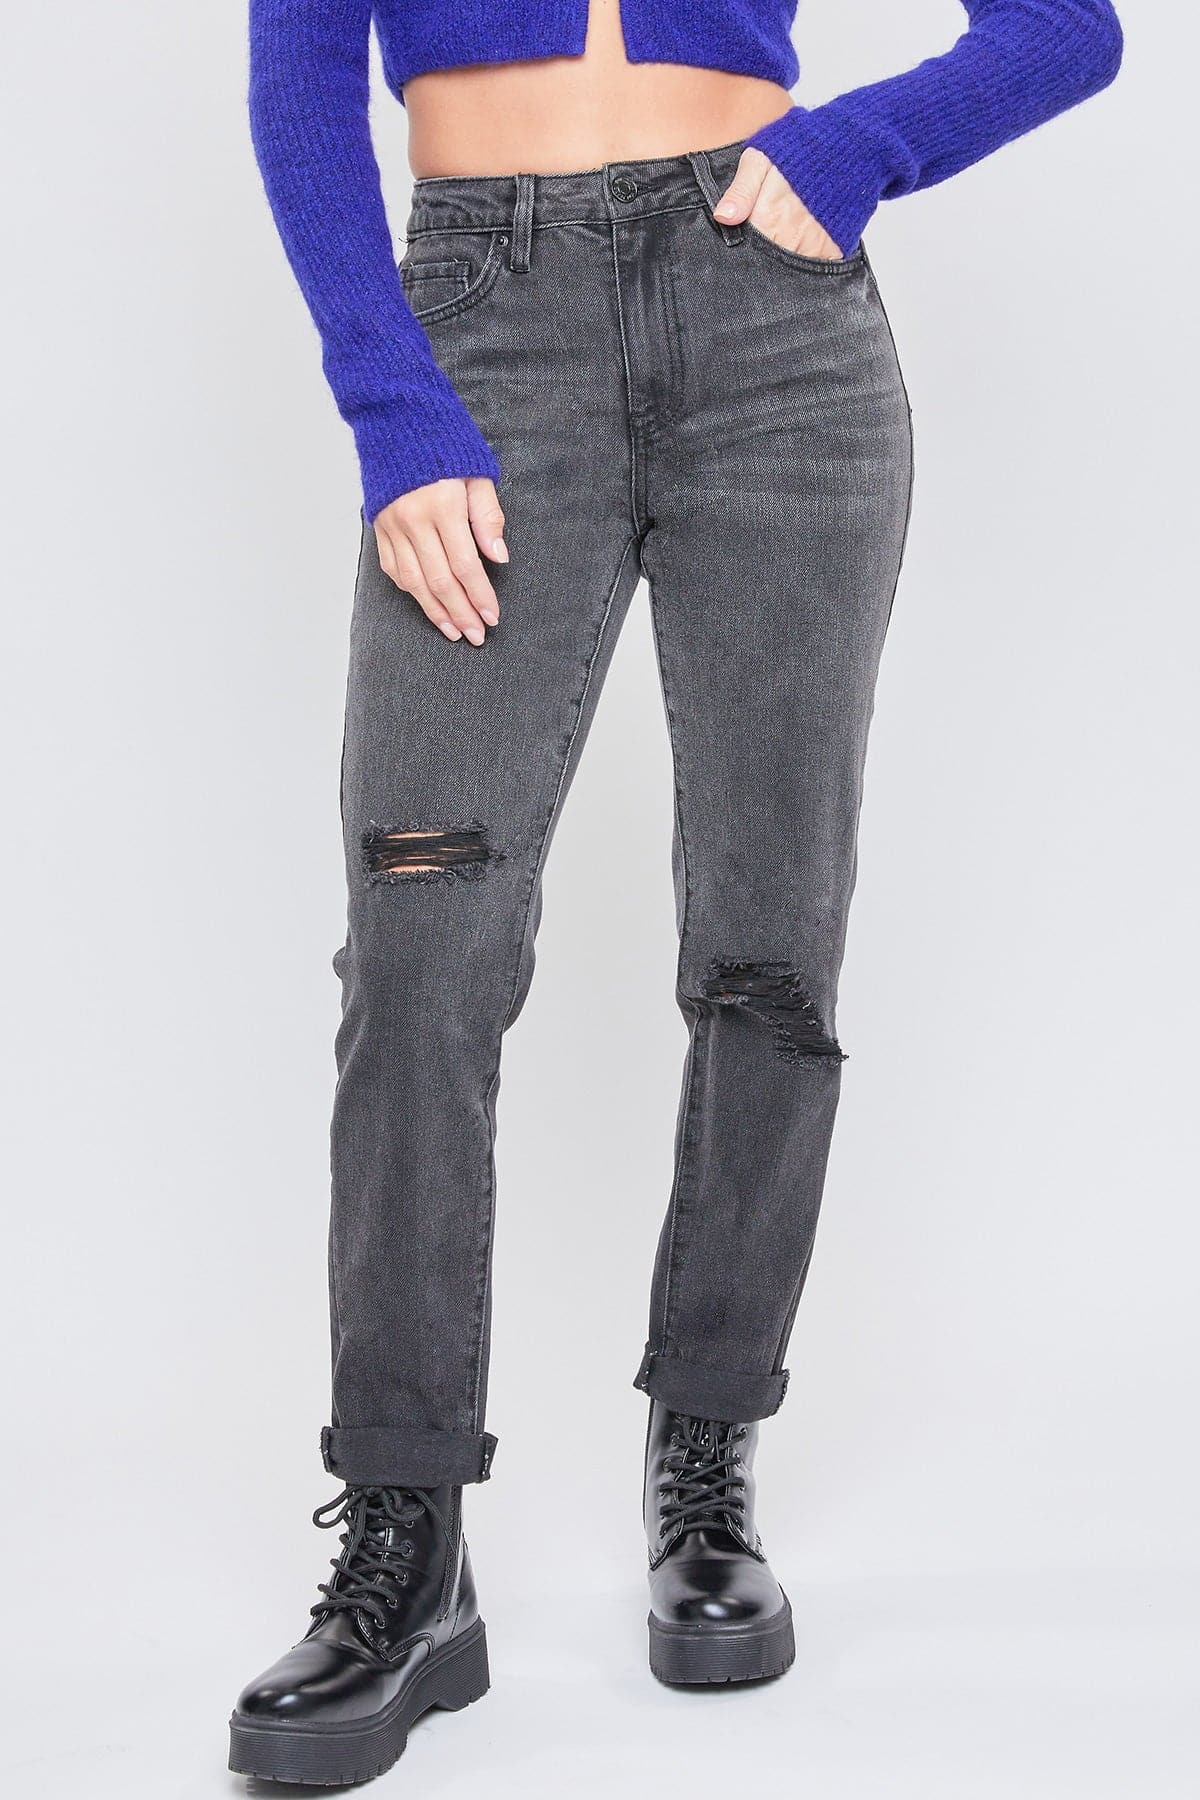 Women's Hybrid Dream  Mom Fit Ankle Jeans